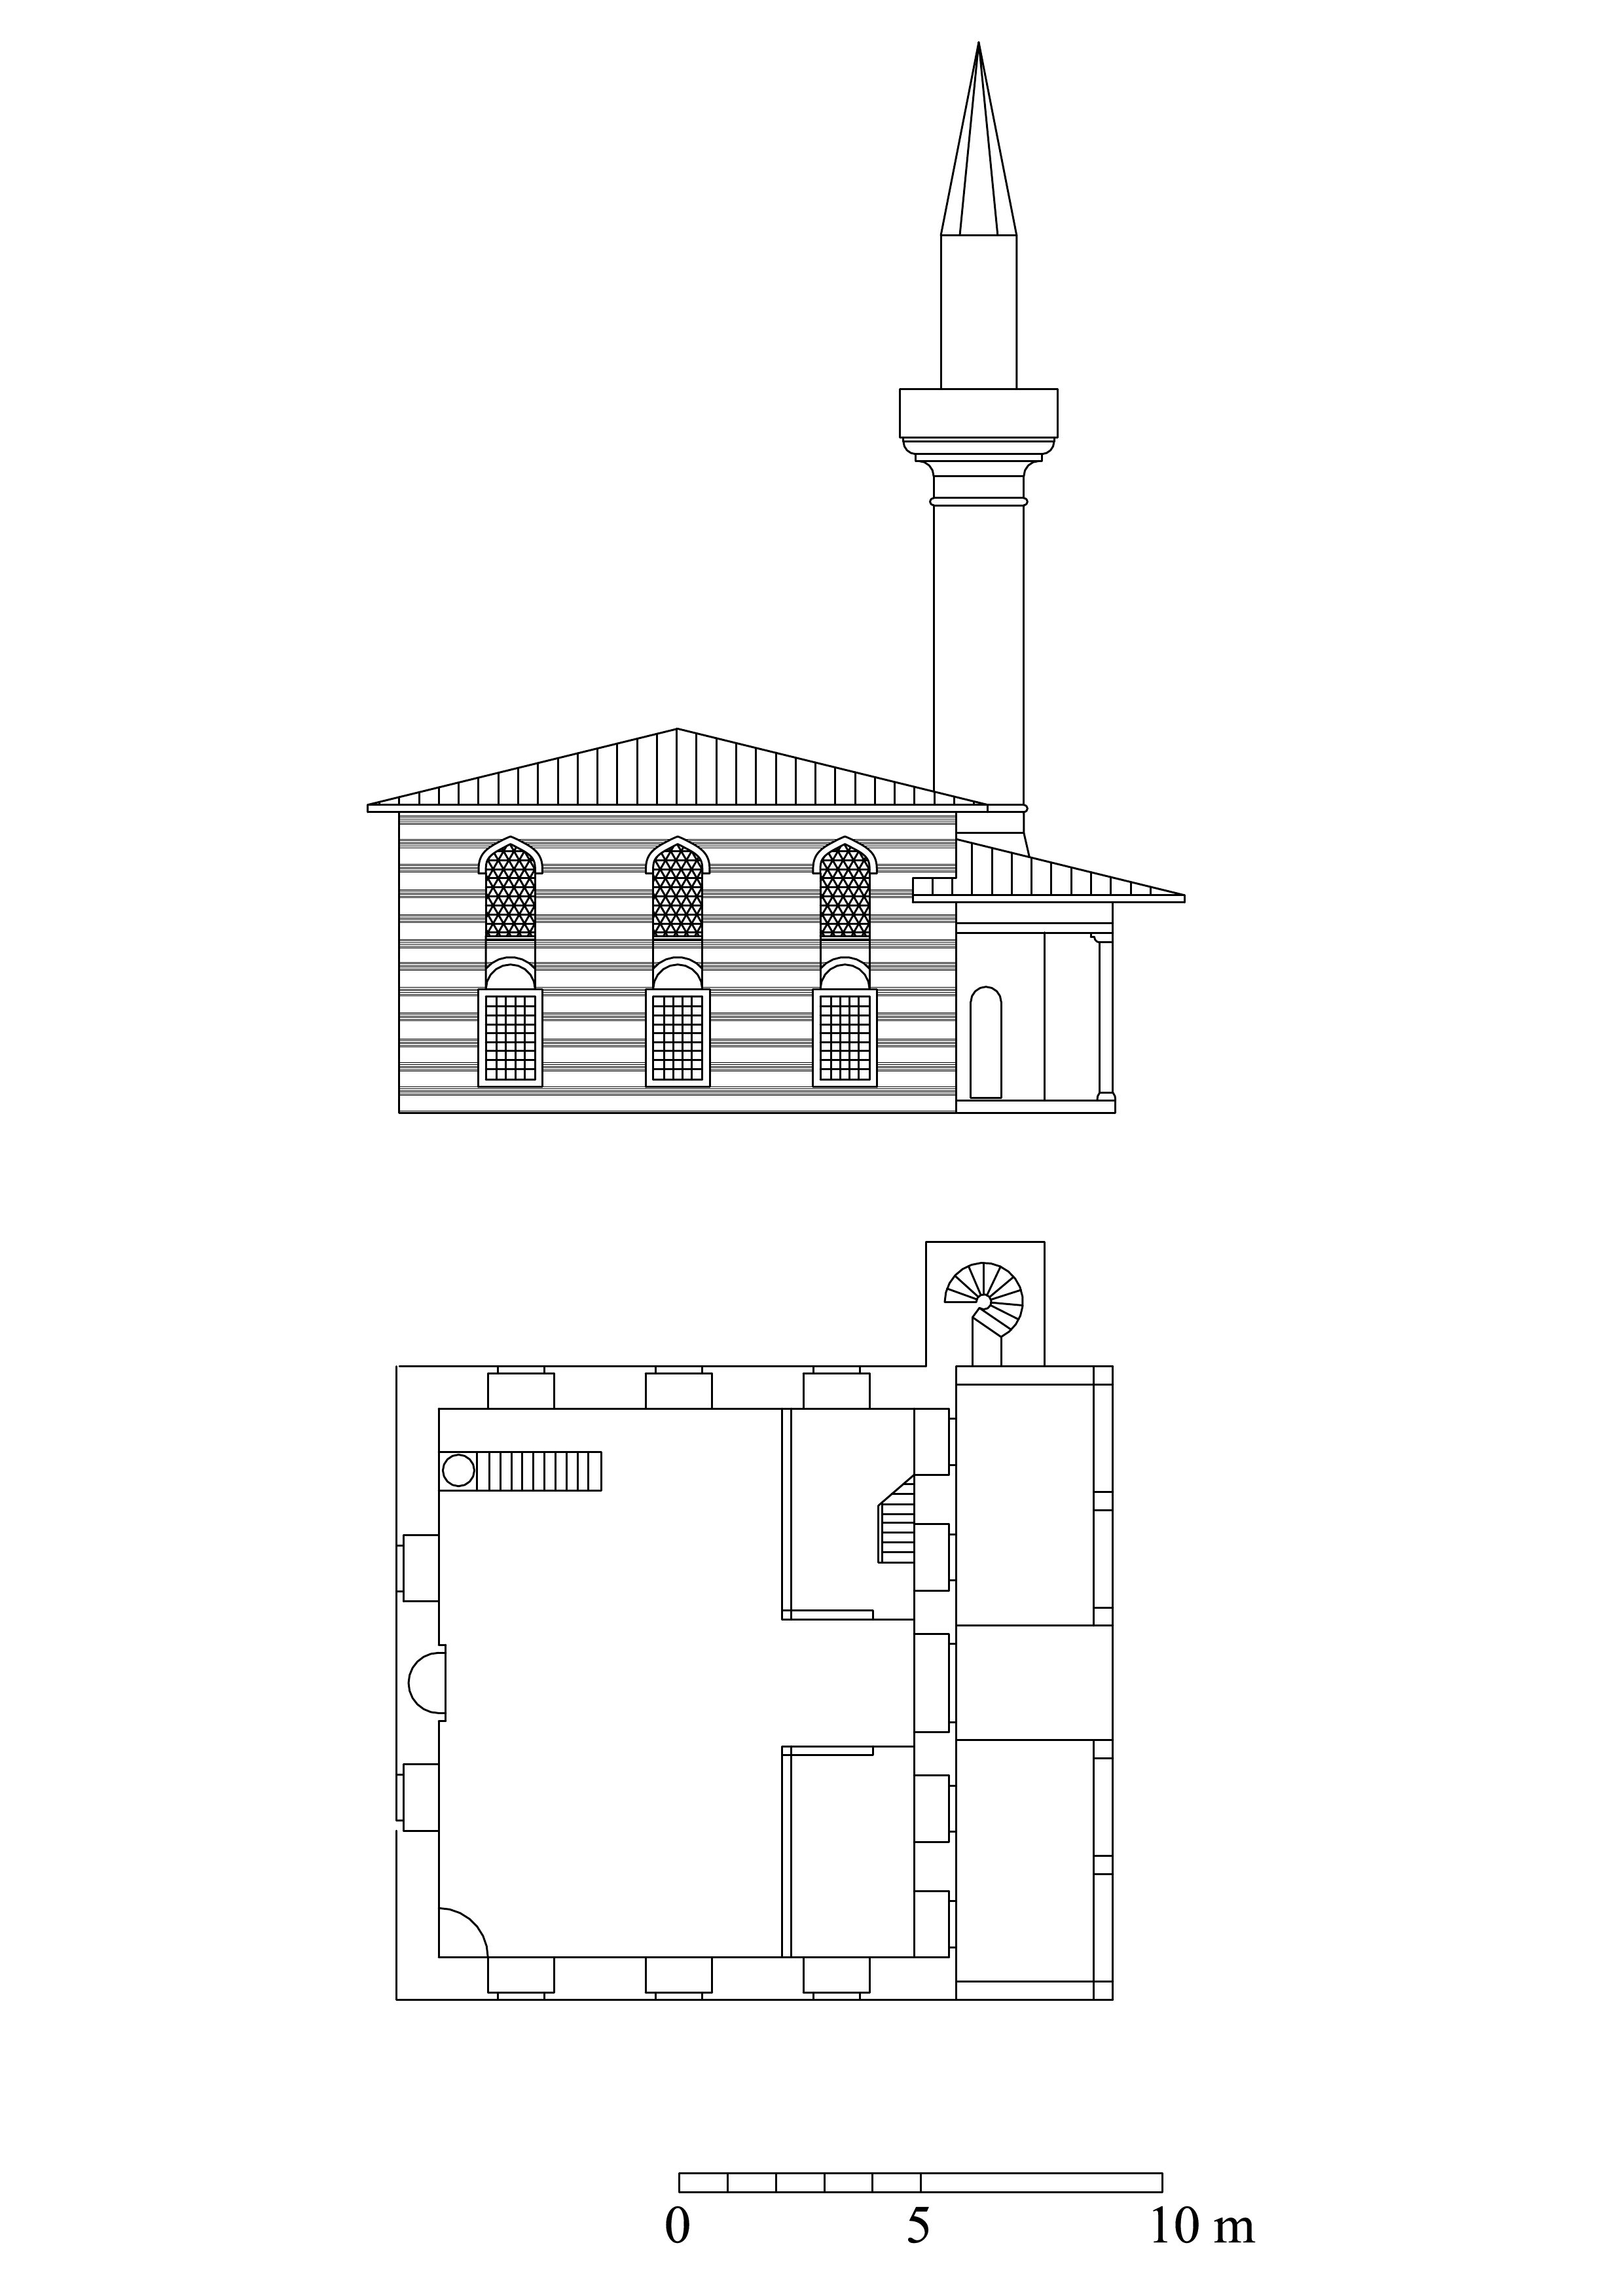 Floor plan and elevation